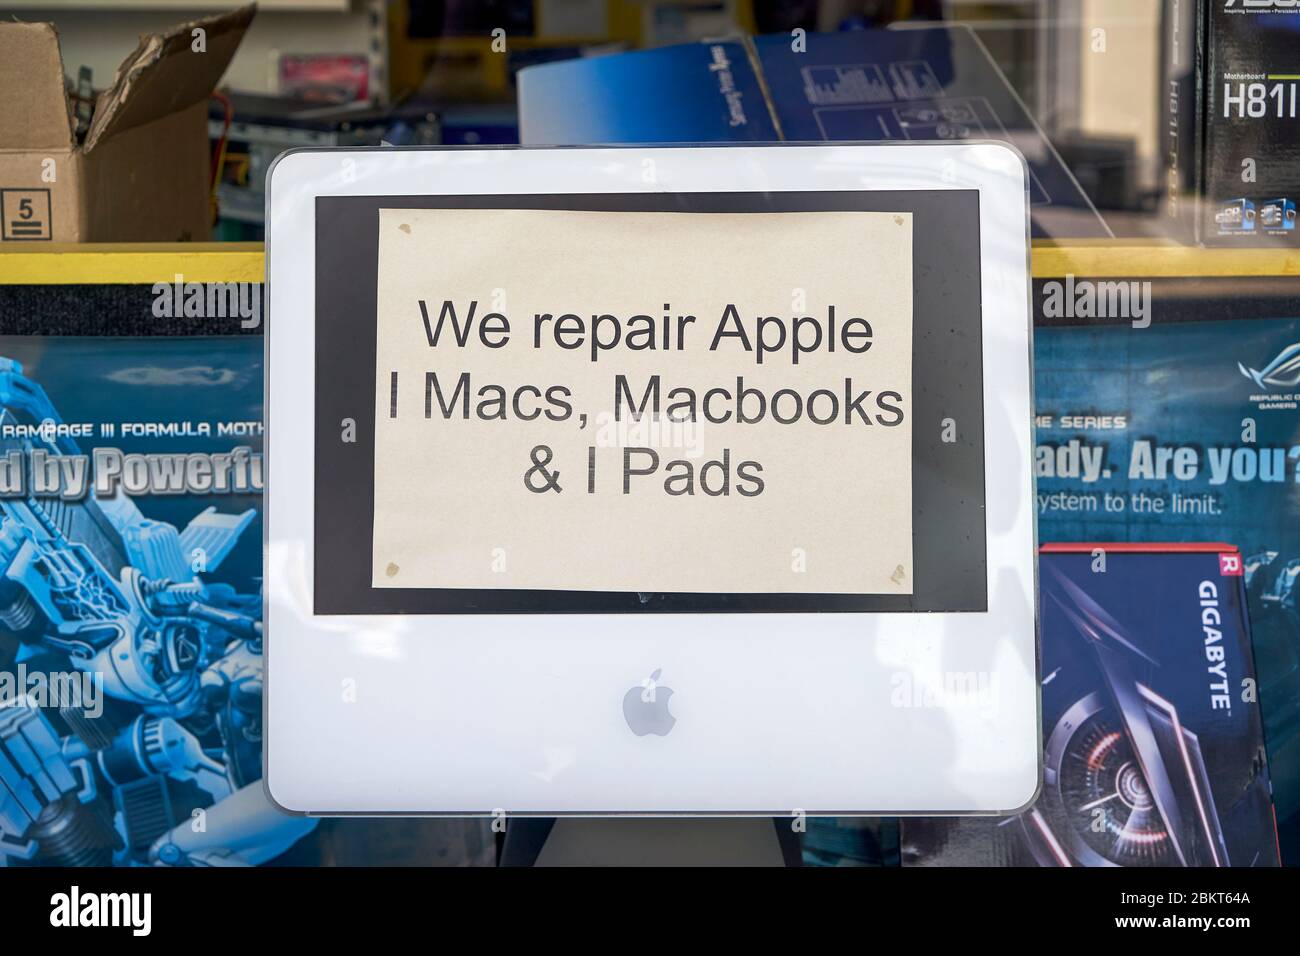 Old iMac computer in shop window with notice advertising a repair service for apple devices Stock Photo